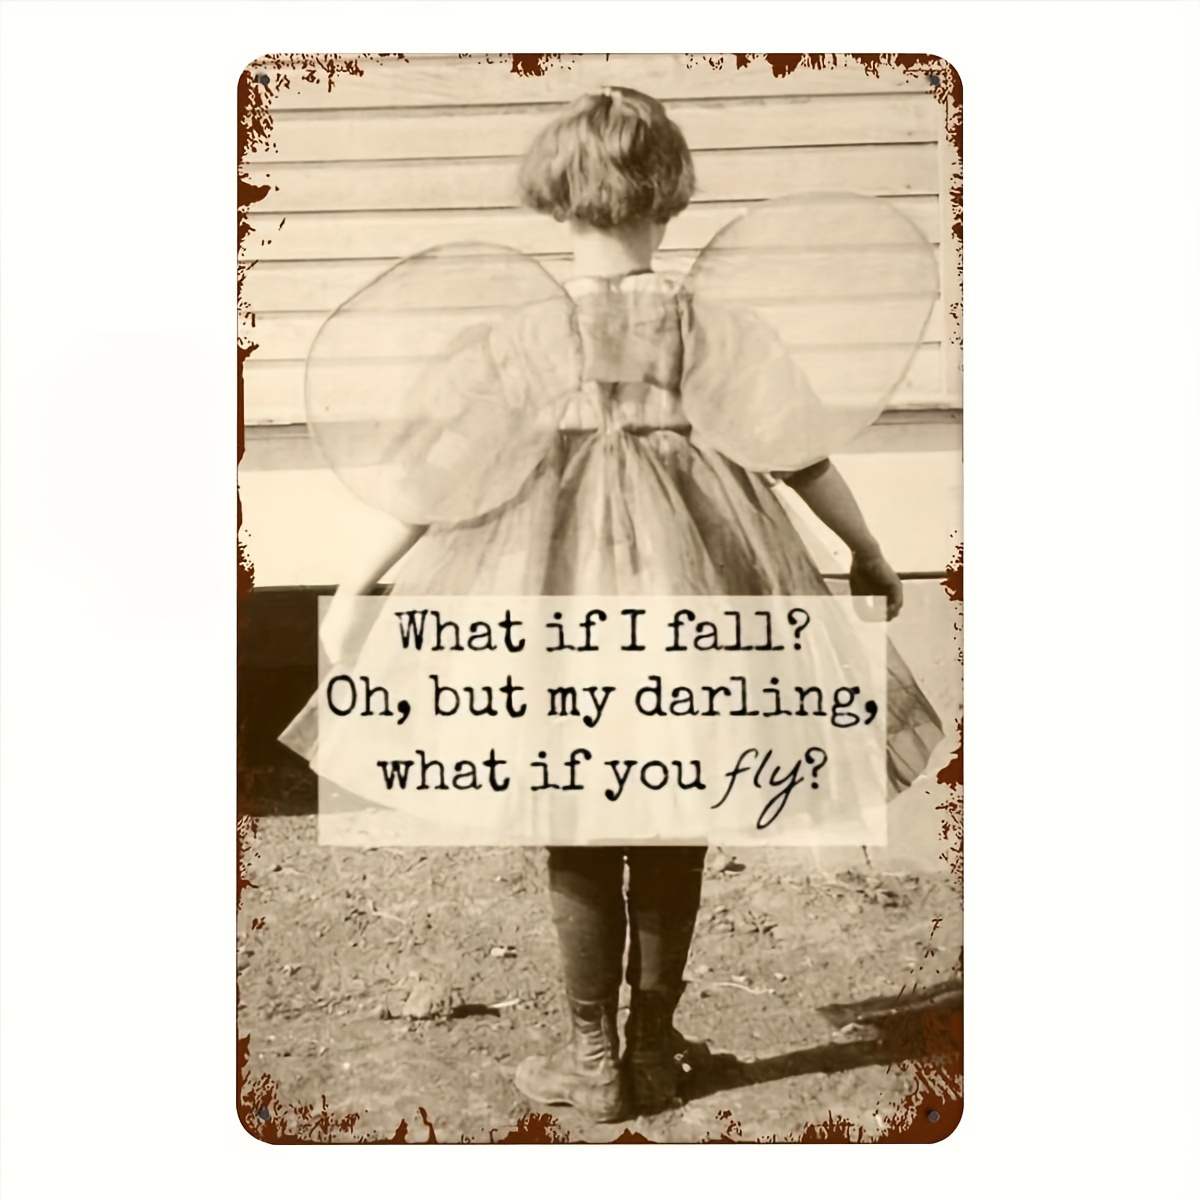 

Metal Poster Plaque What If I Fall？oh But My Darling What If You Fly Metal Sign Retro Wall Decor For Home Cafes Office Store Pubs Club Sign Gift 8x12 Inch - Tinplate Plaque Tin Sign